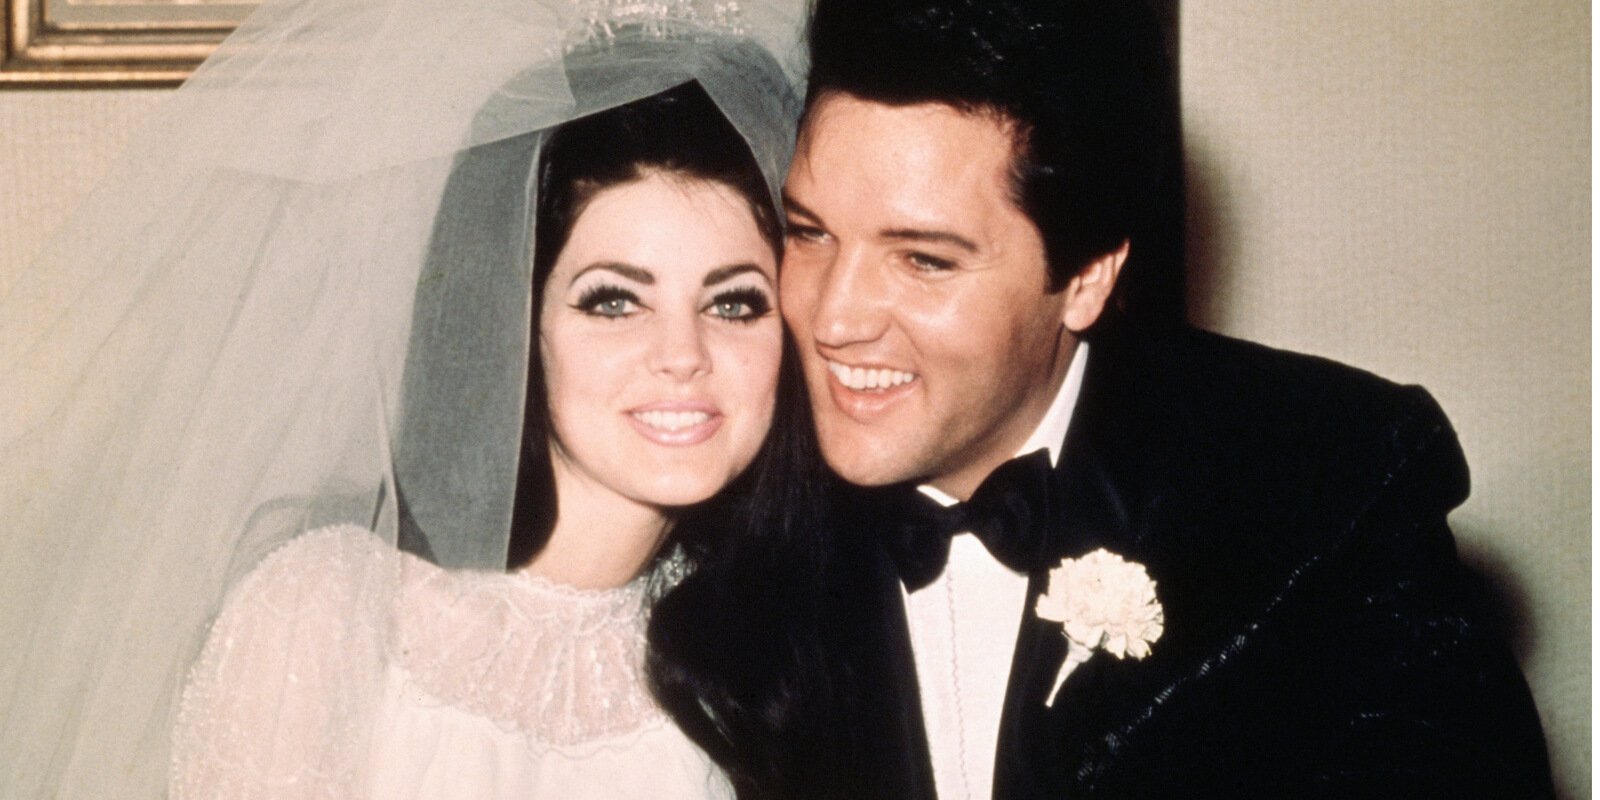 Priscilla and Elvis Presley on their wedding day, May 1, 1967.